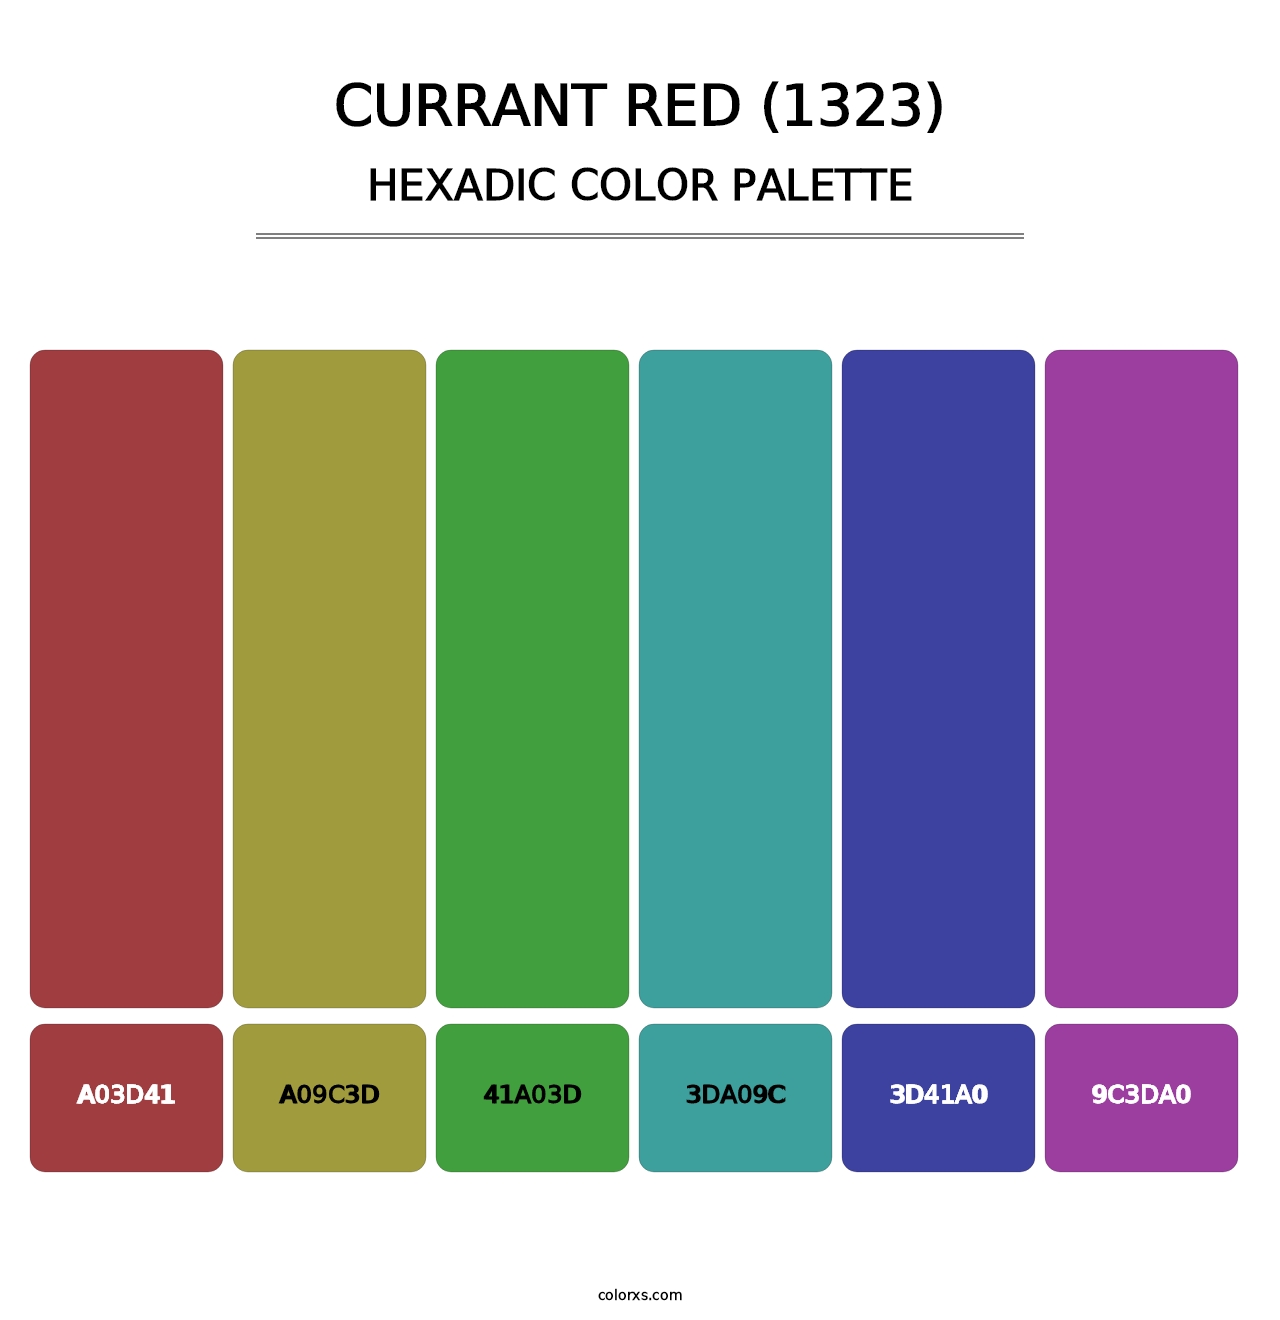 Currant Red (1323) - Hexadic Color Palette